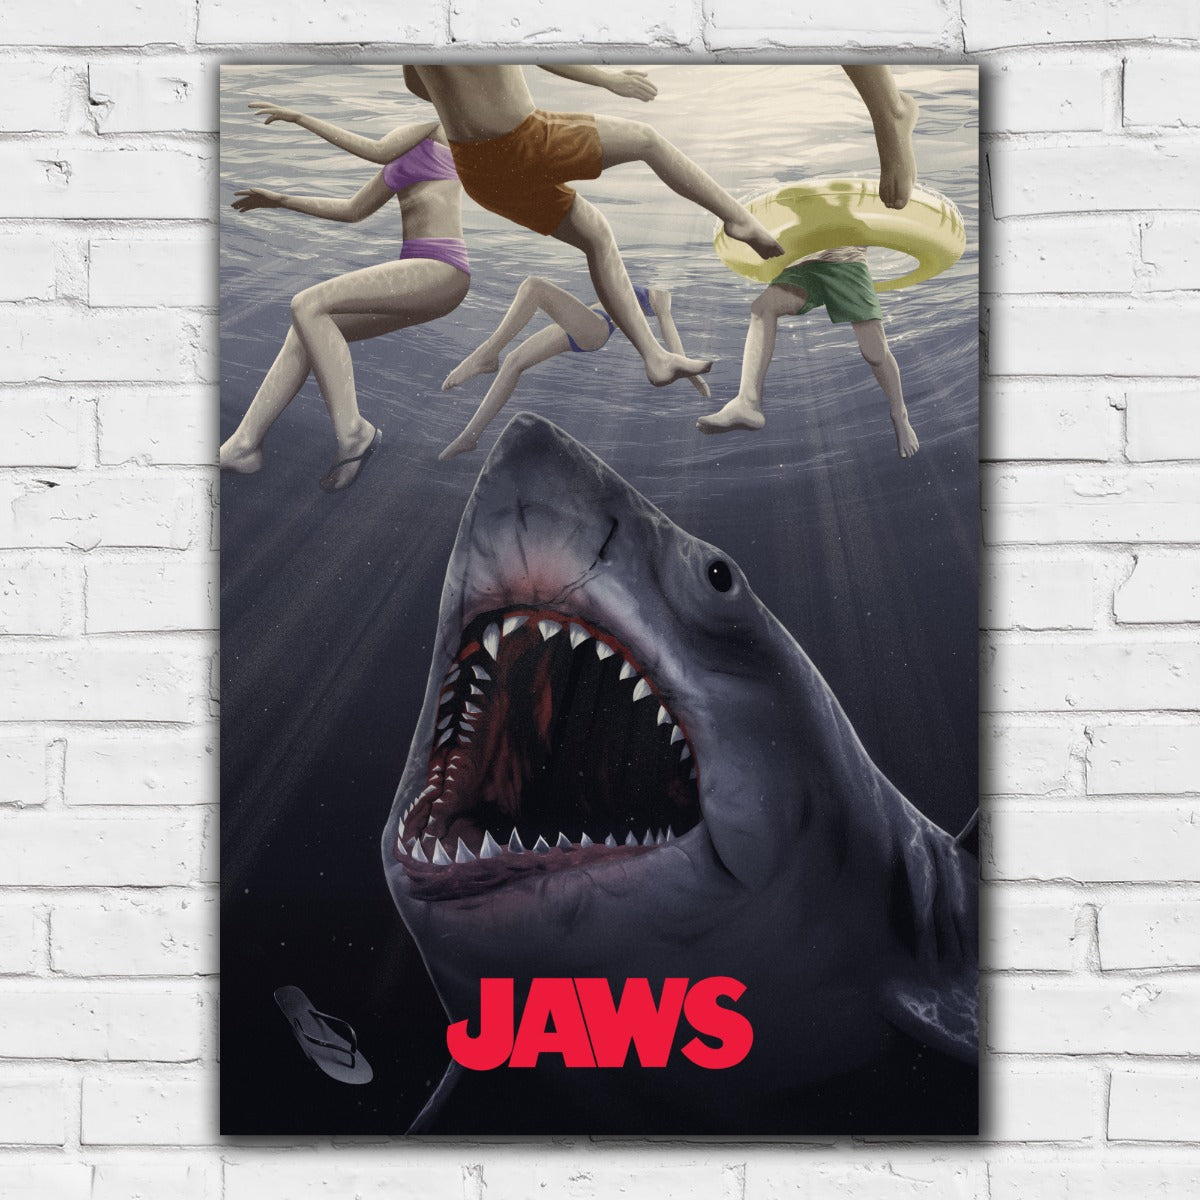 Jaws Print - Swimmers Floating Over Shark